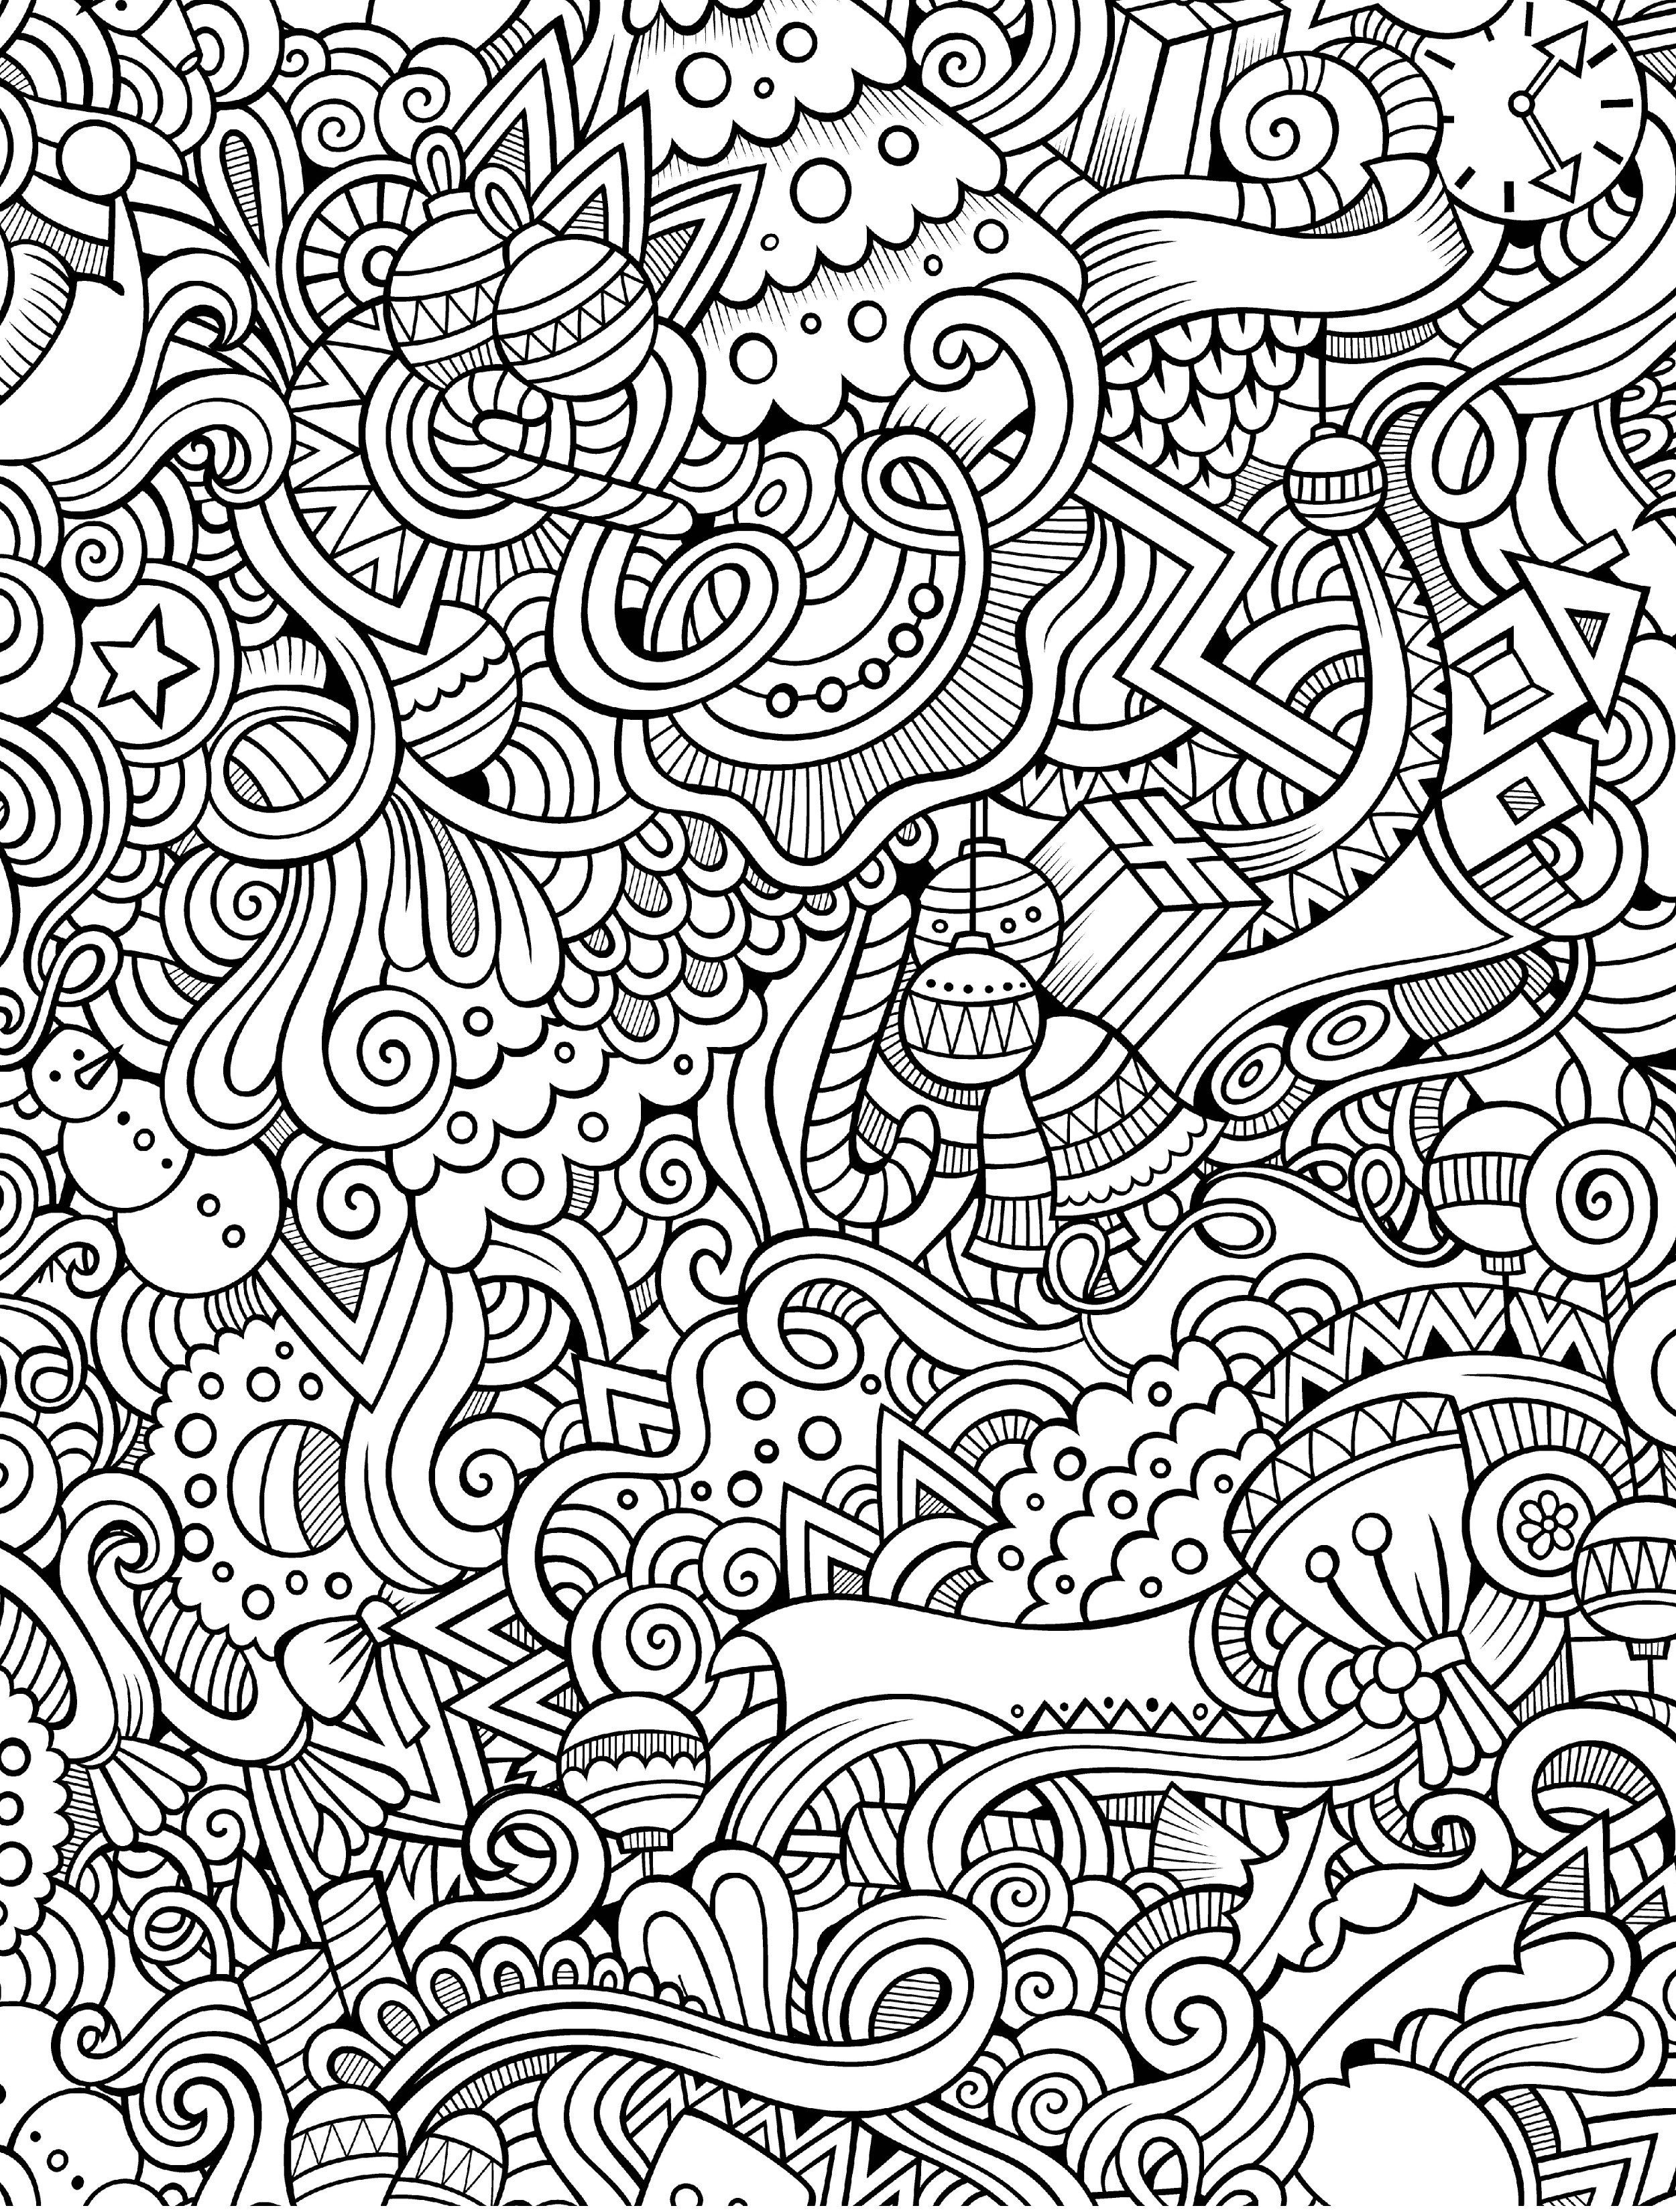 10 Free Printable Holiday Adult Coloring Pages | Coloring Pages - Free Printable Coloring Cards For Adults